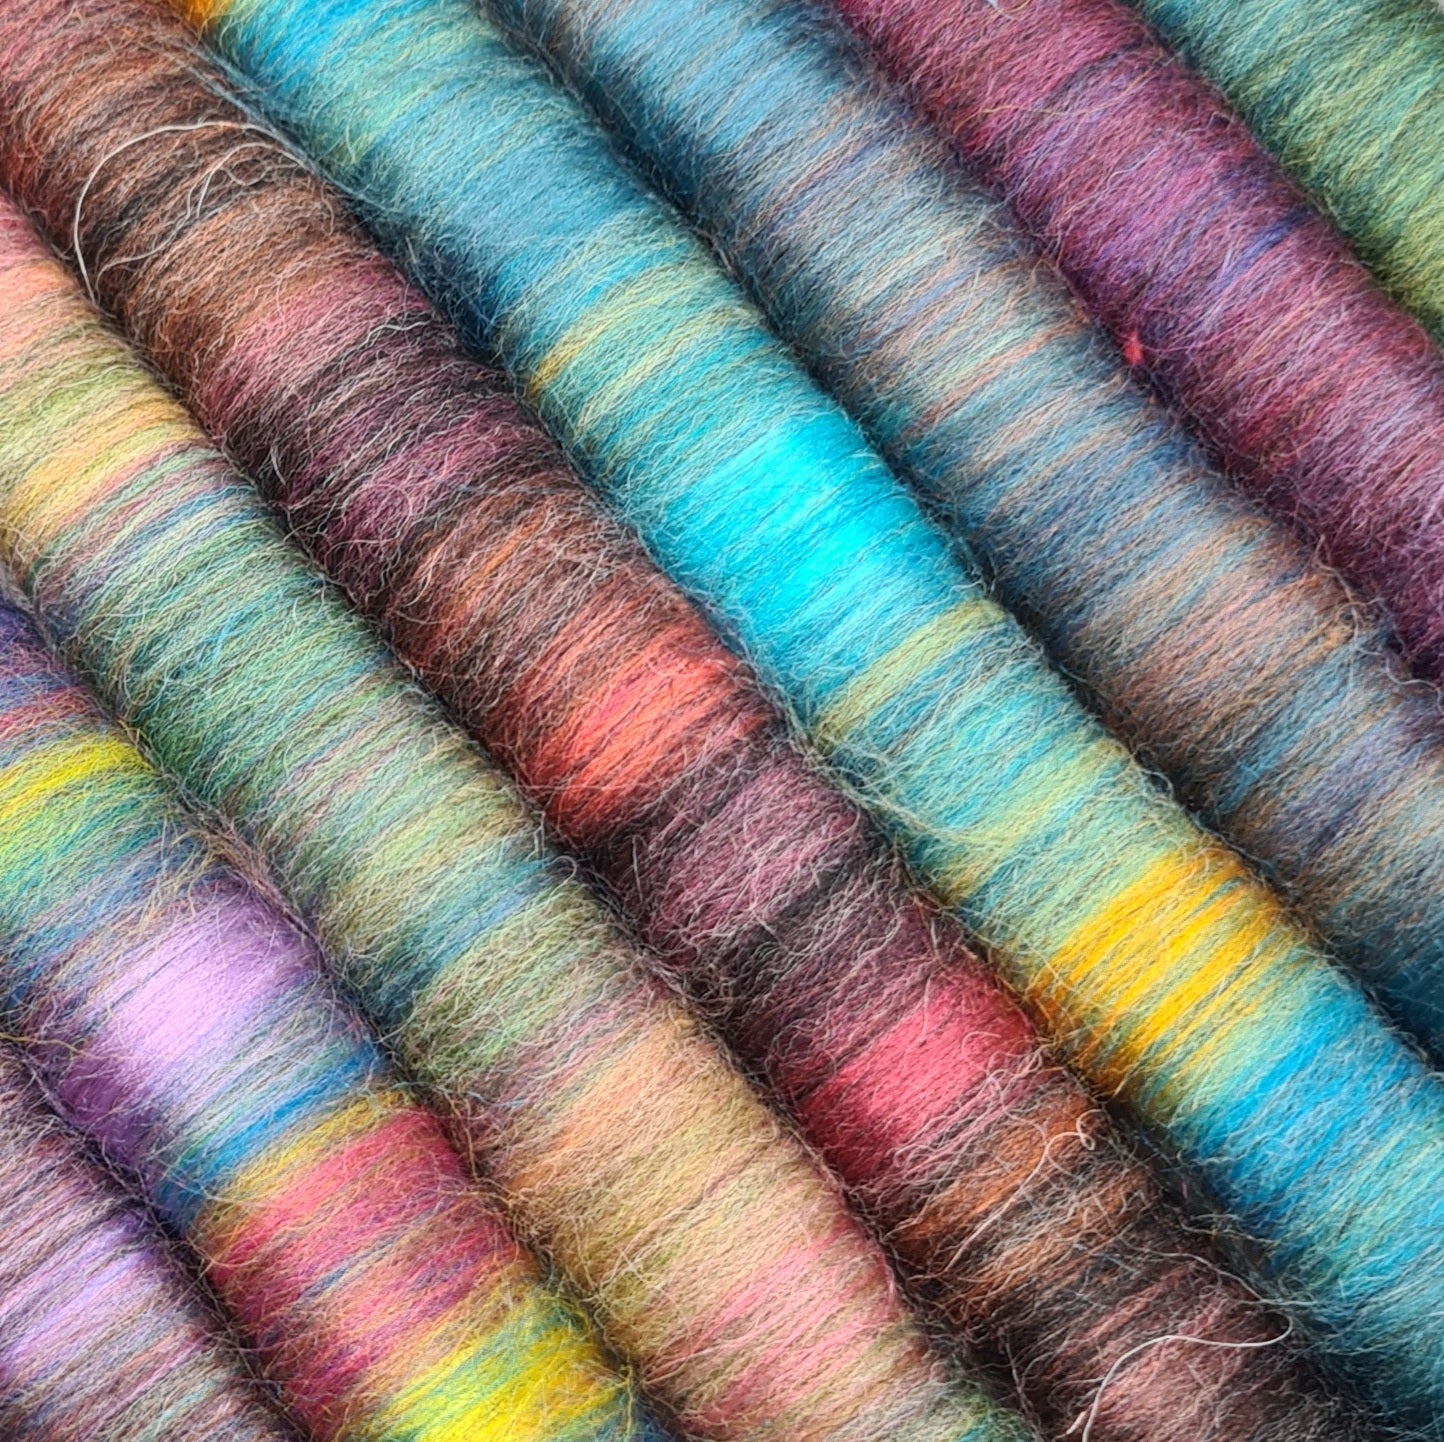 Rolags (or Punis) for spinning, Horsea,  Wool and Bamboo